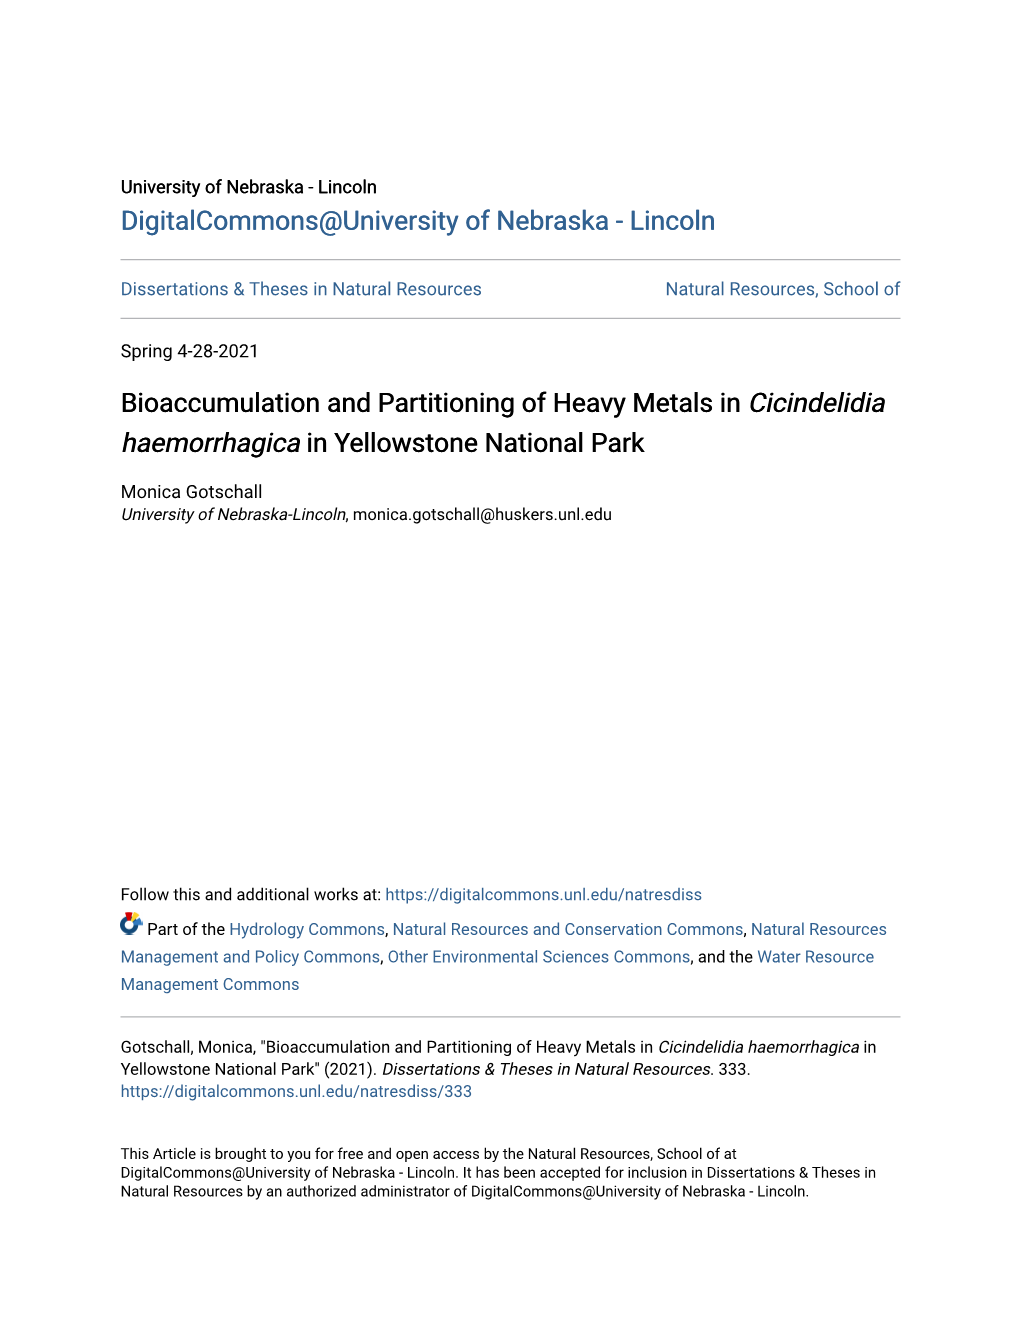 Bioaccumulation and Partitioning of Heavy Metals in &lt;I&gt;Cicindelidia